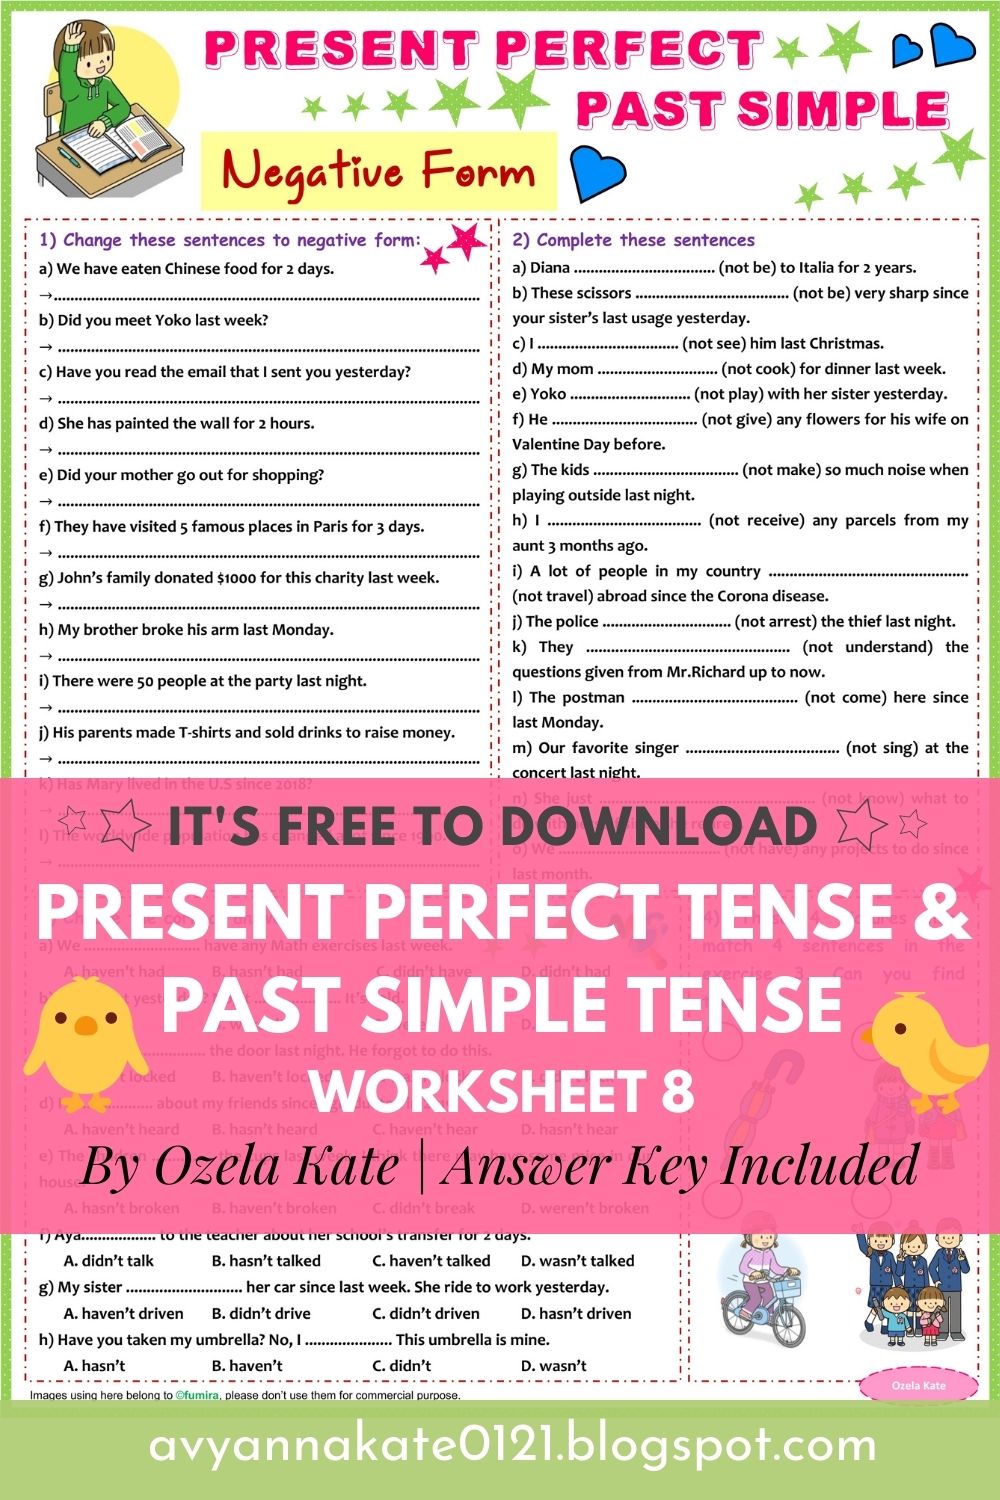 Ozela Kate Worksheet For Children And Beginner Tenses Present Perfect Tense And Past Simple